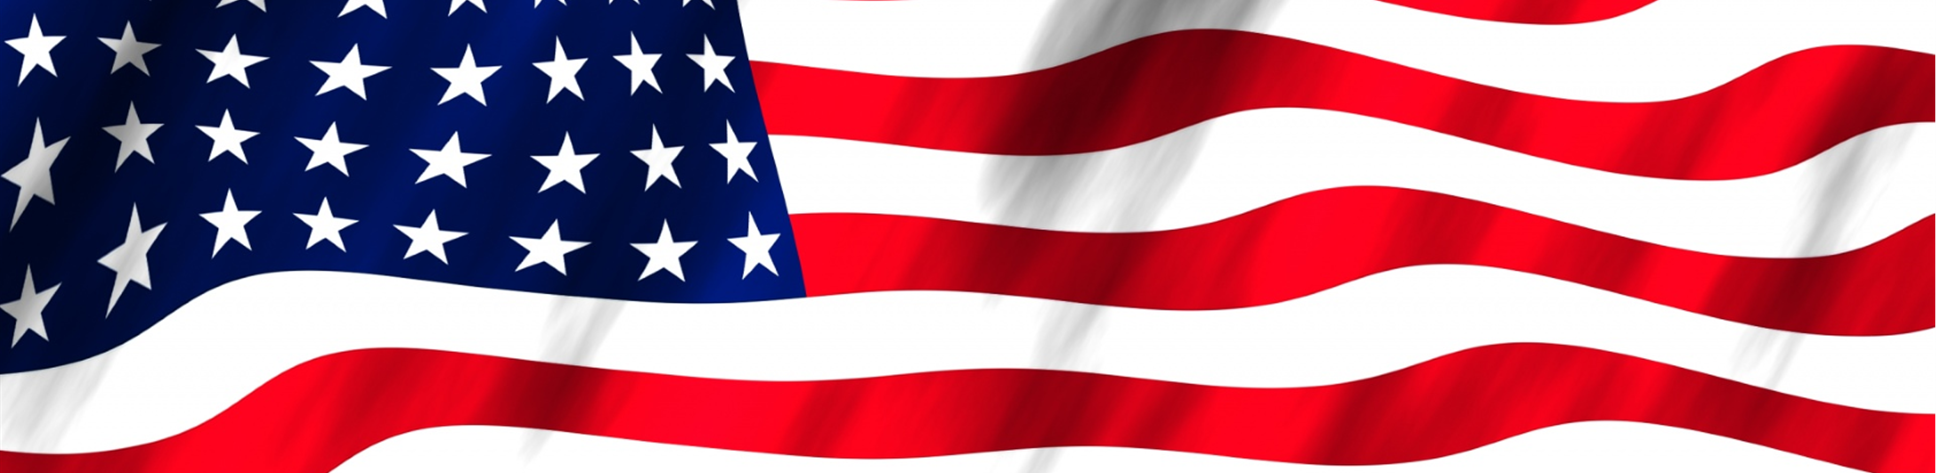 Image of an American Flag